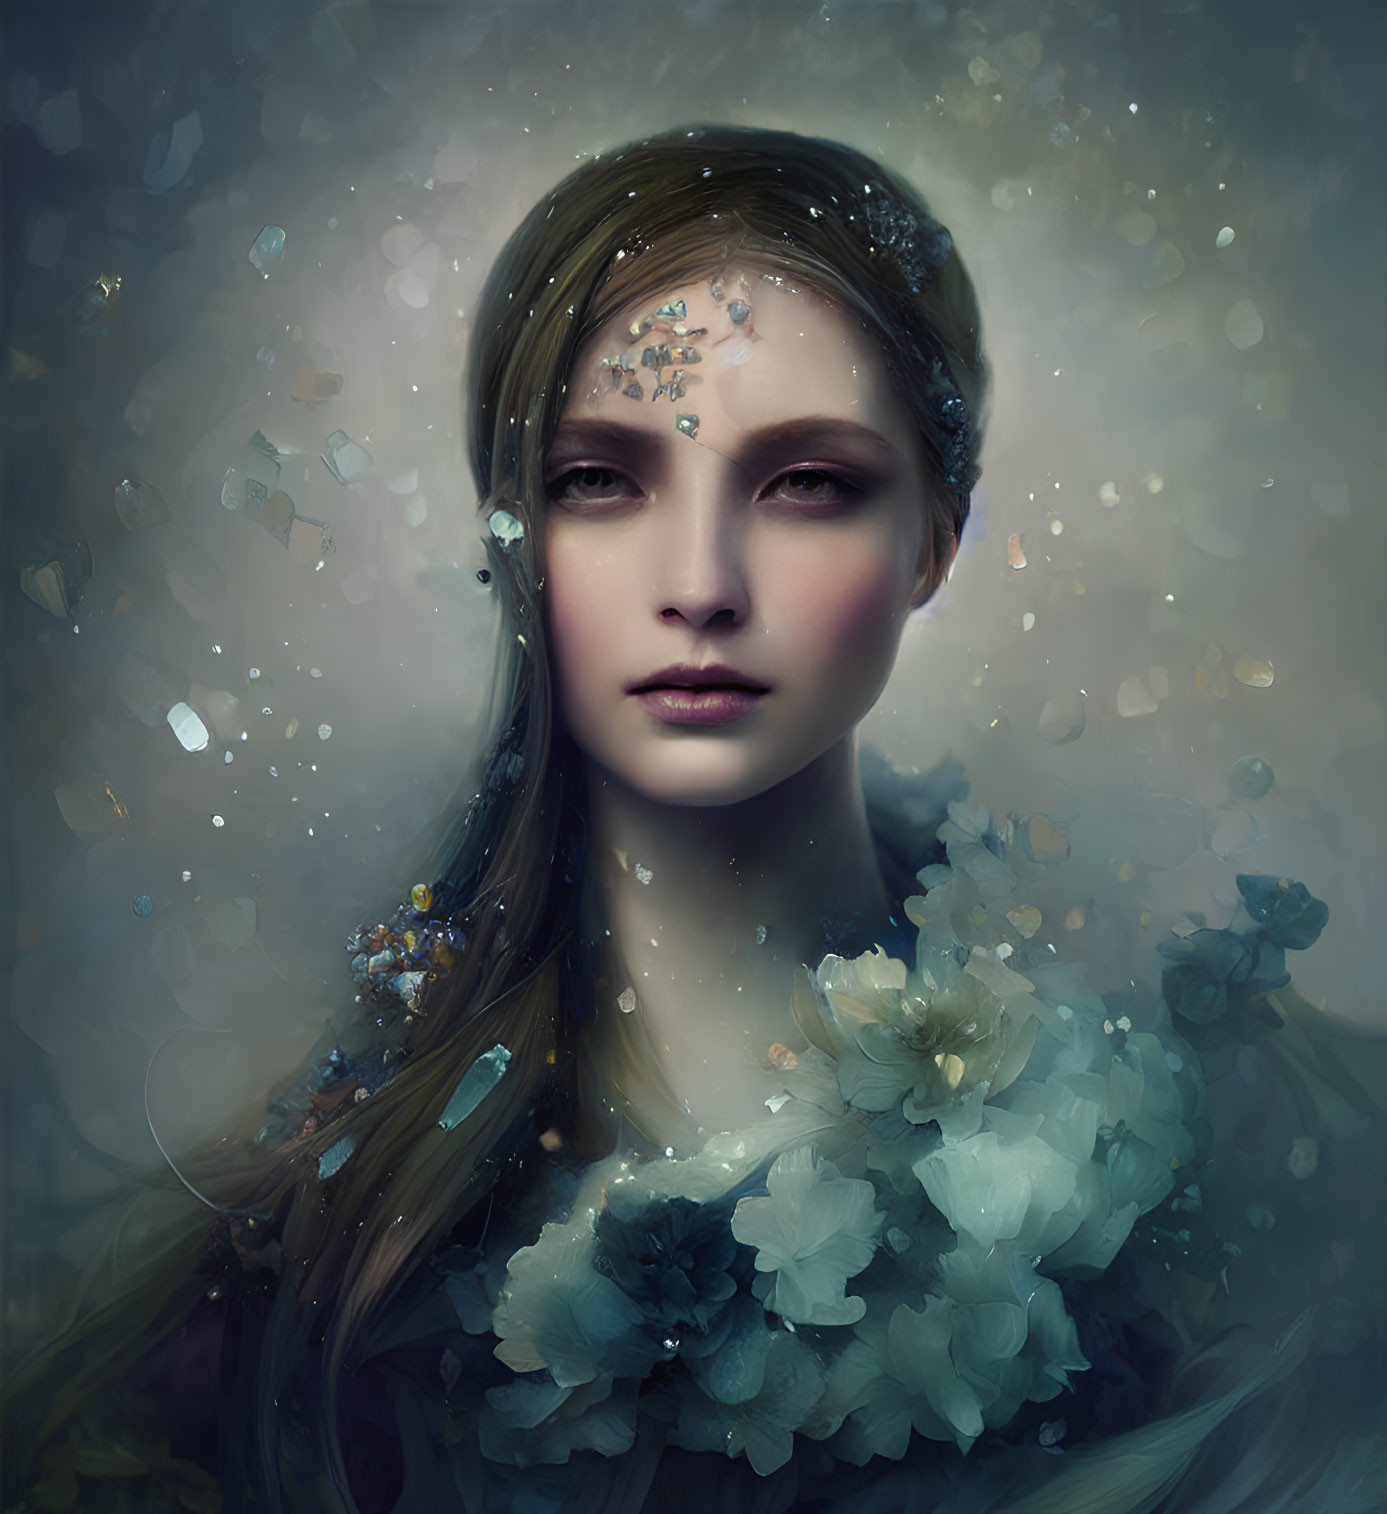 Ethereal portrait of a woman with flowers and crystals in dreamlike setting